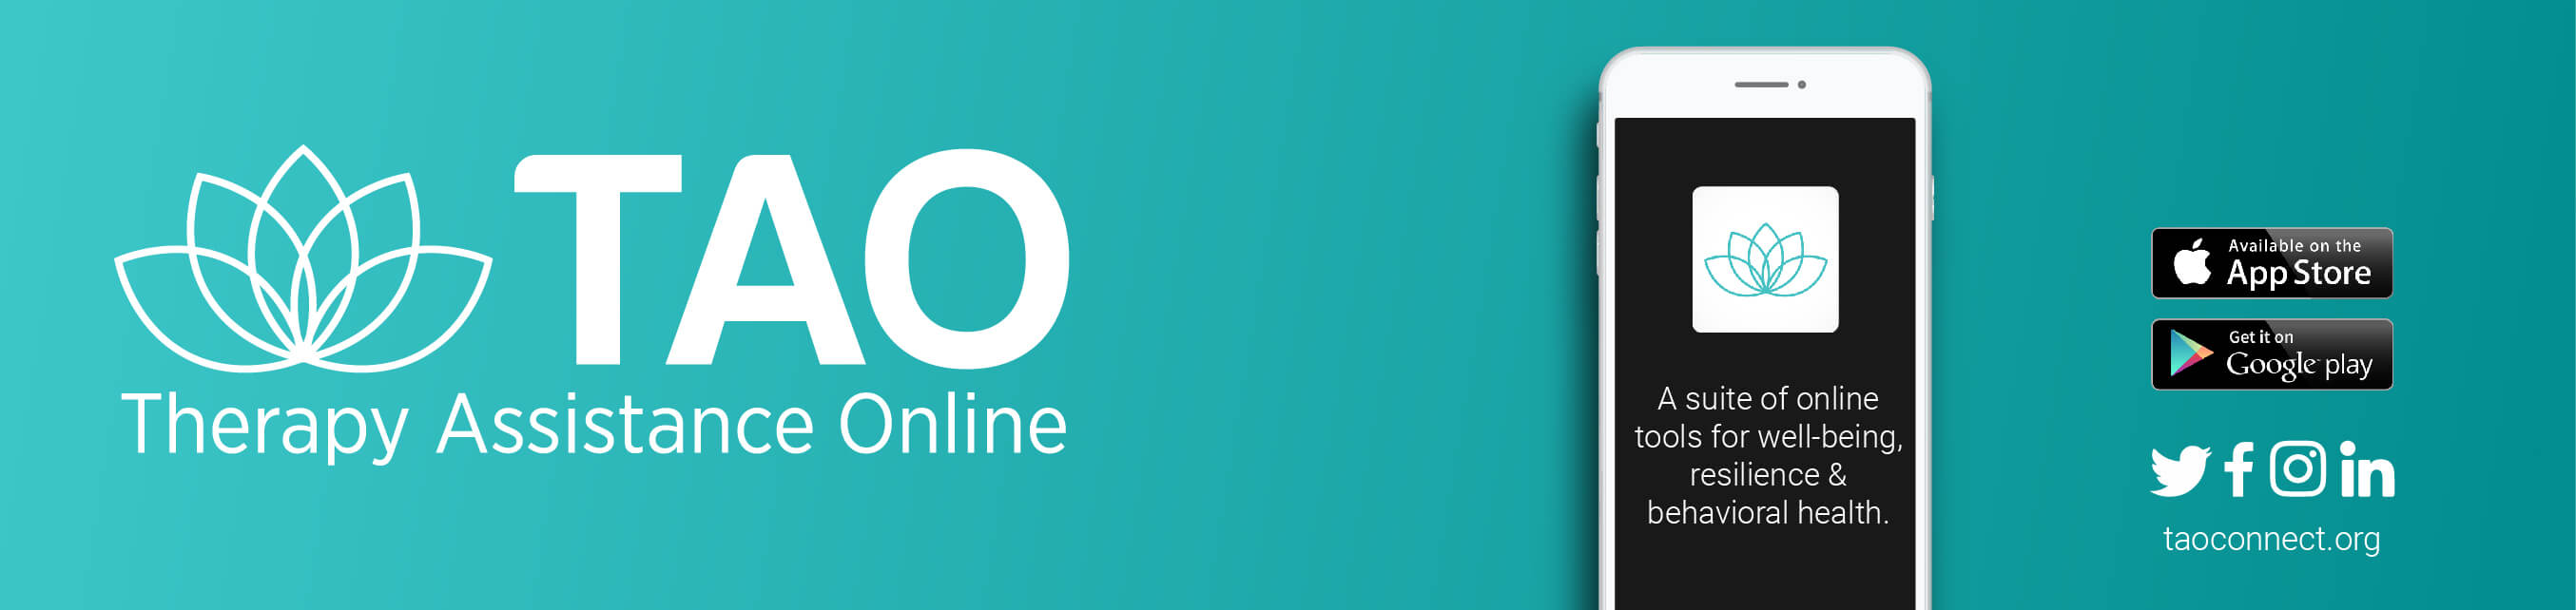 The words "TAO Therapy ASsisted Online" to the left of an icon of a phone with the TAO app being used